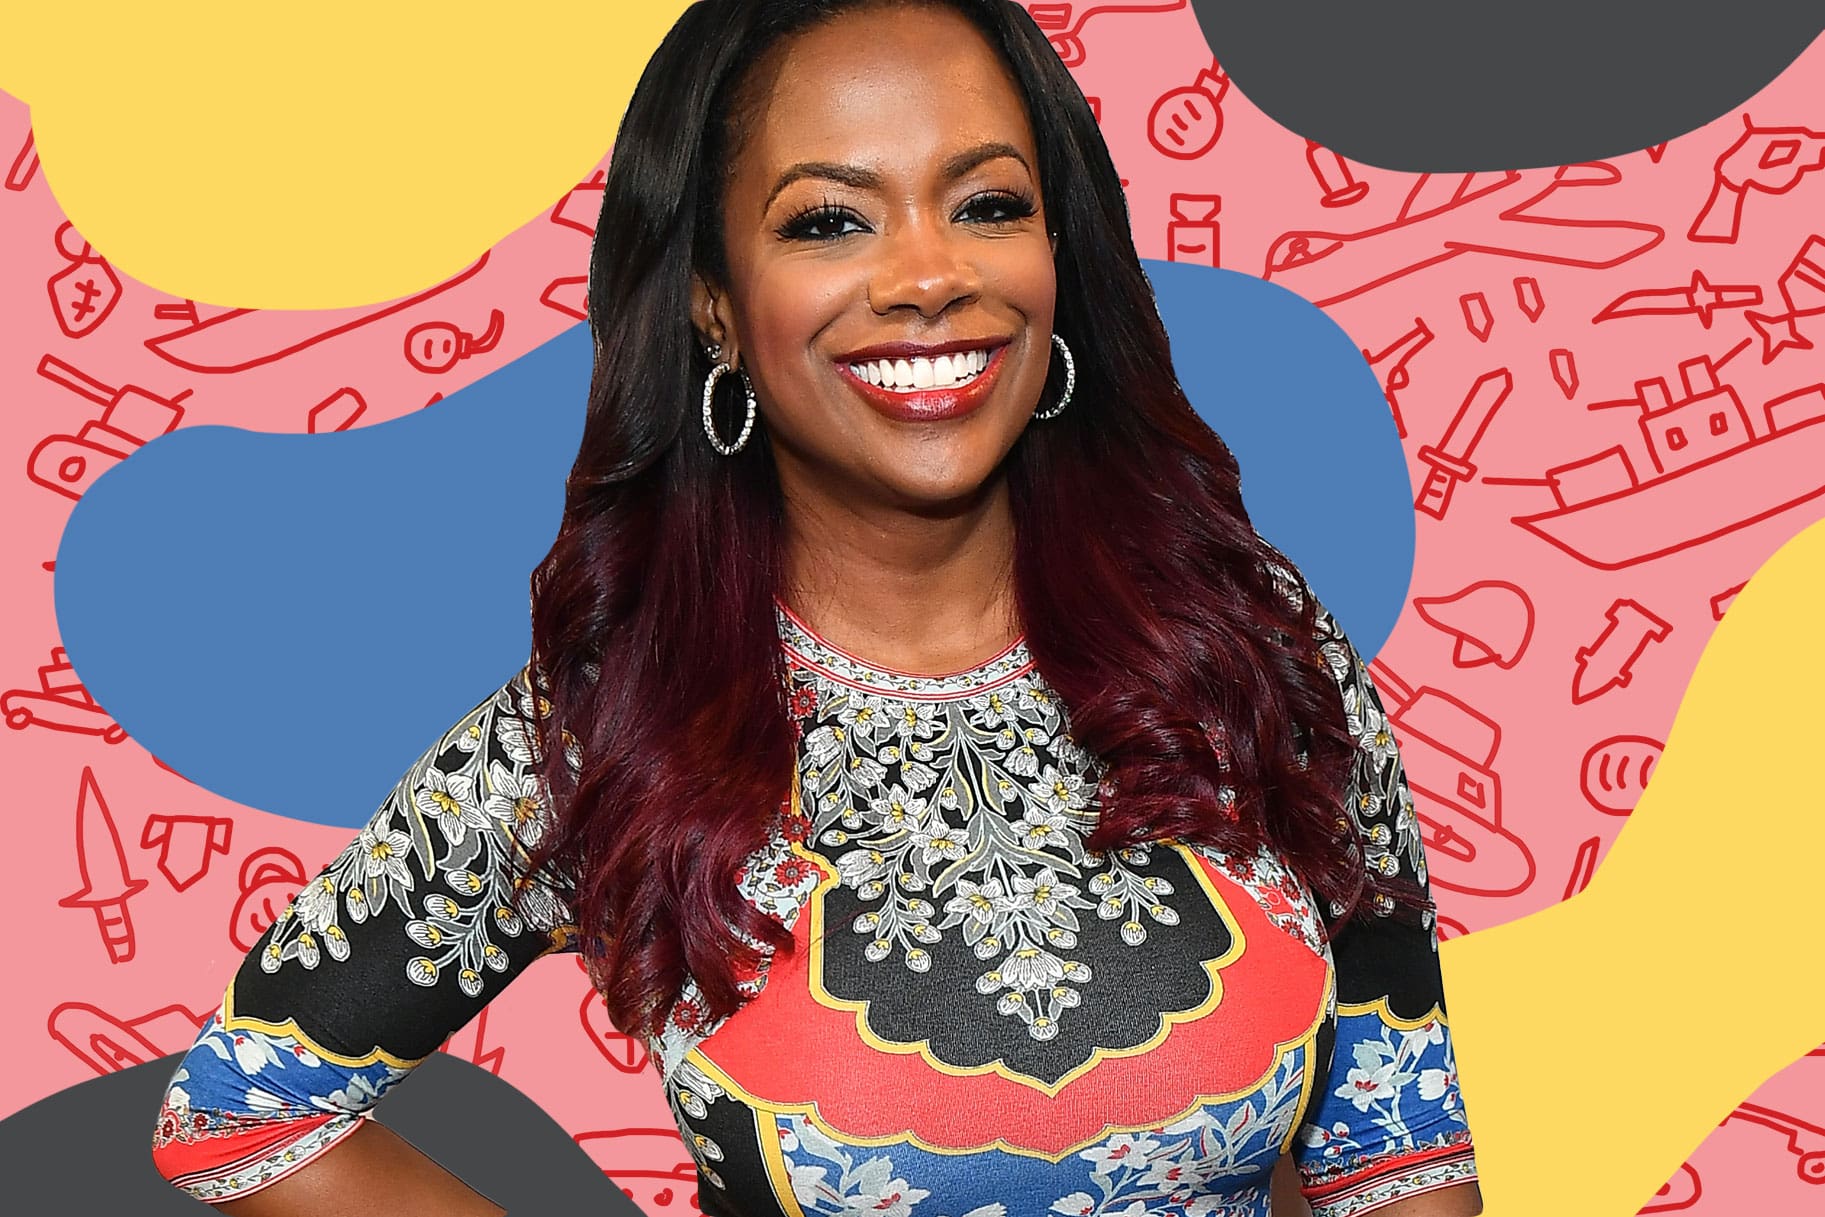 ”kandi-burruss-makes-fans-happy-with-juicy-black-friday-deals-for-her-products”